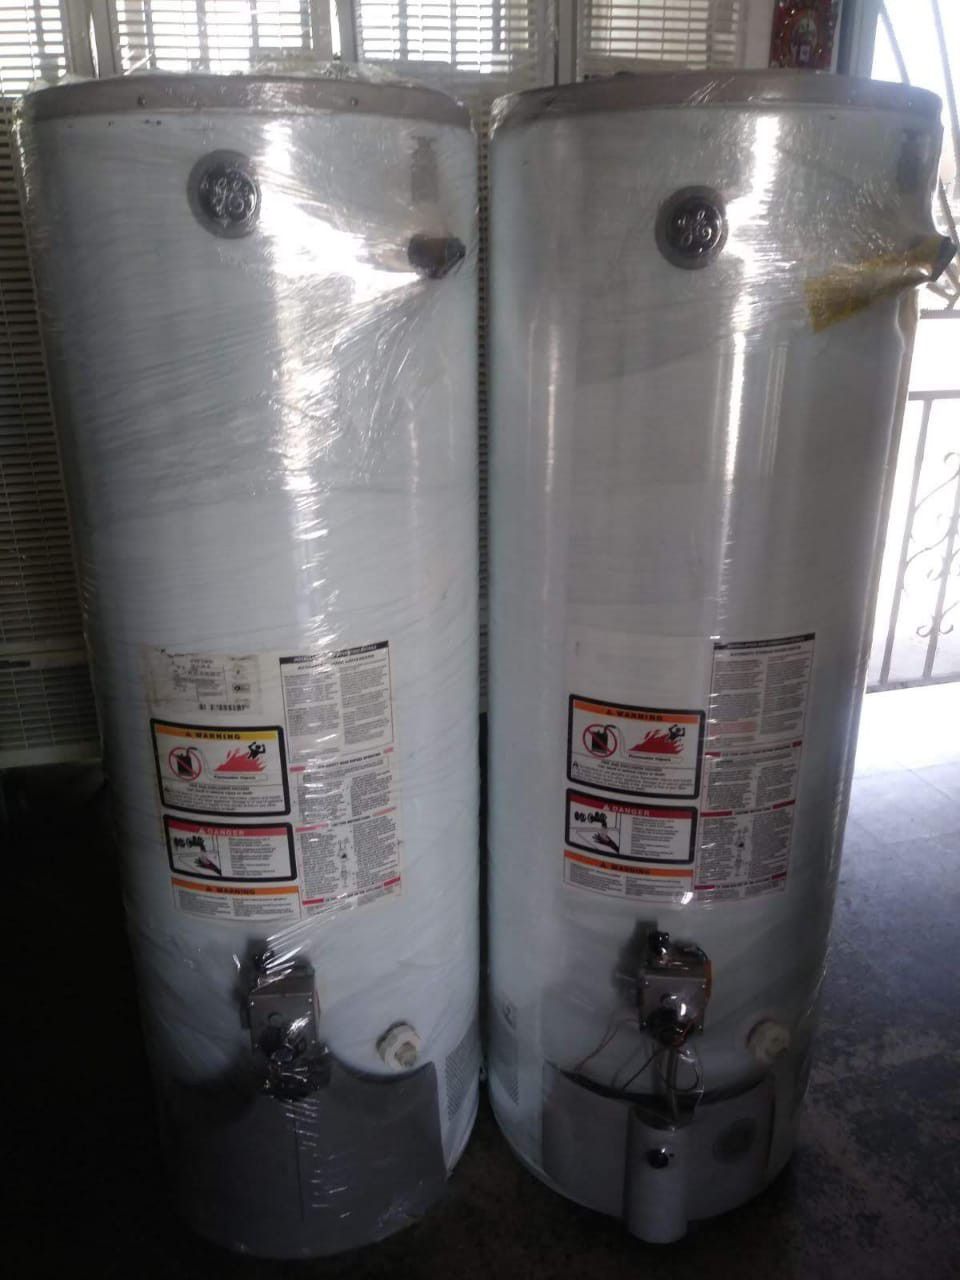 Special sale water heater today for 320 whit installation included